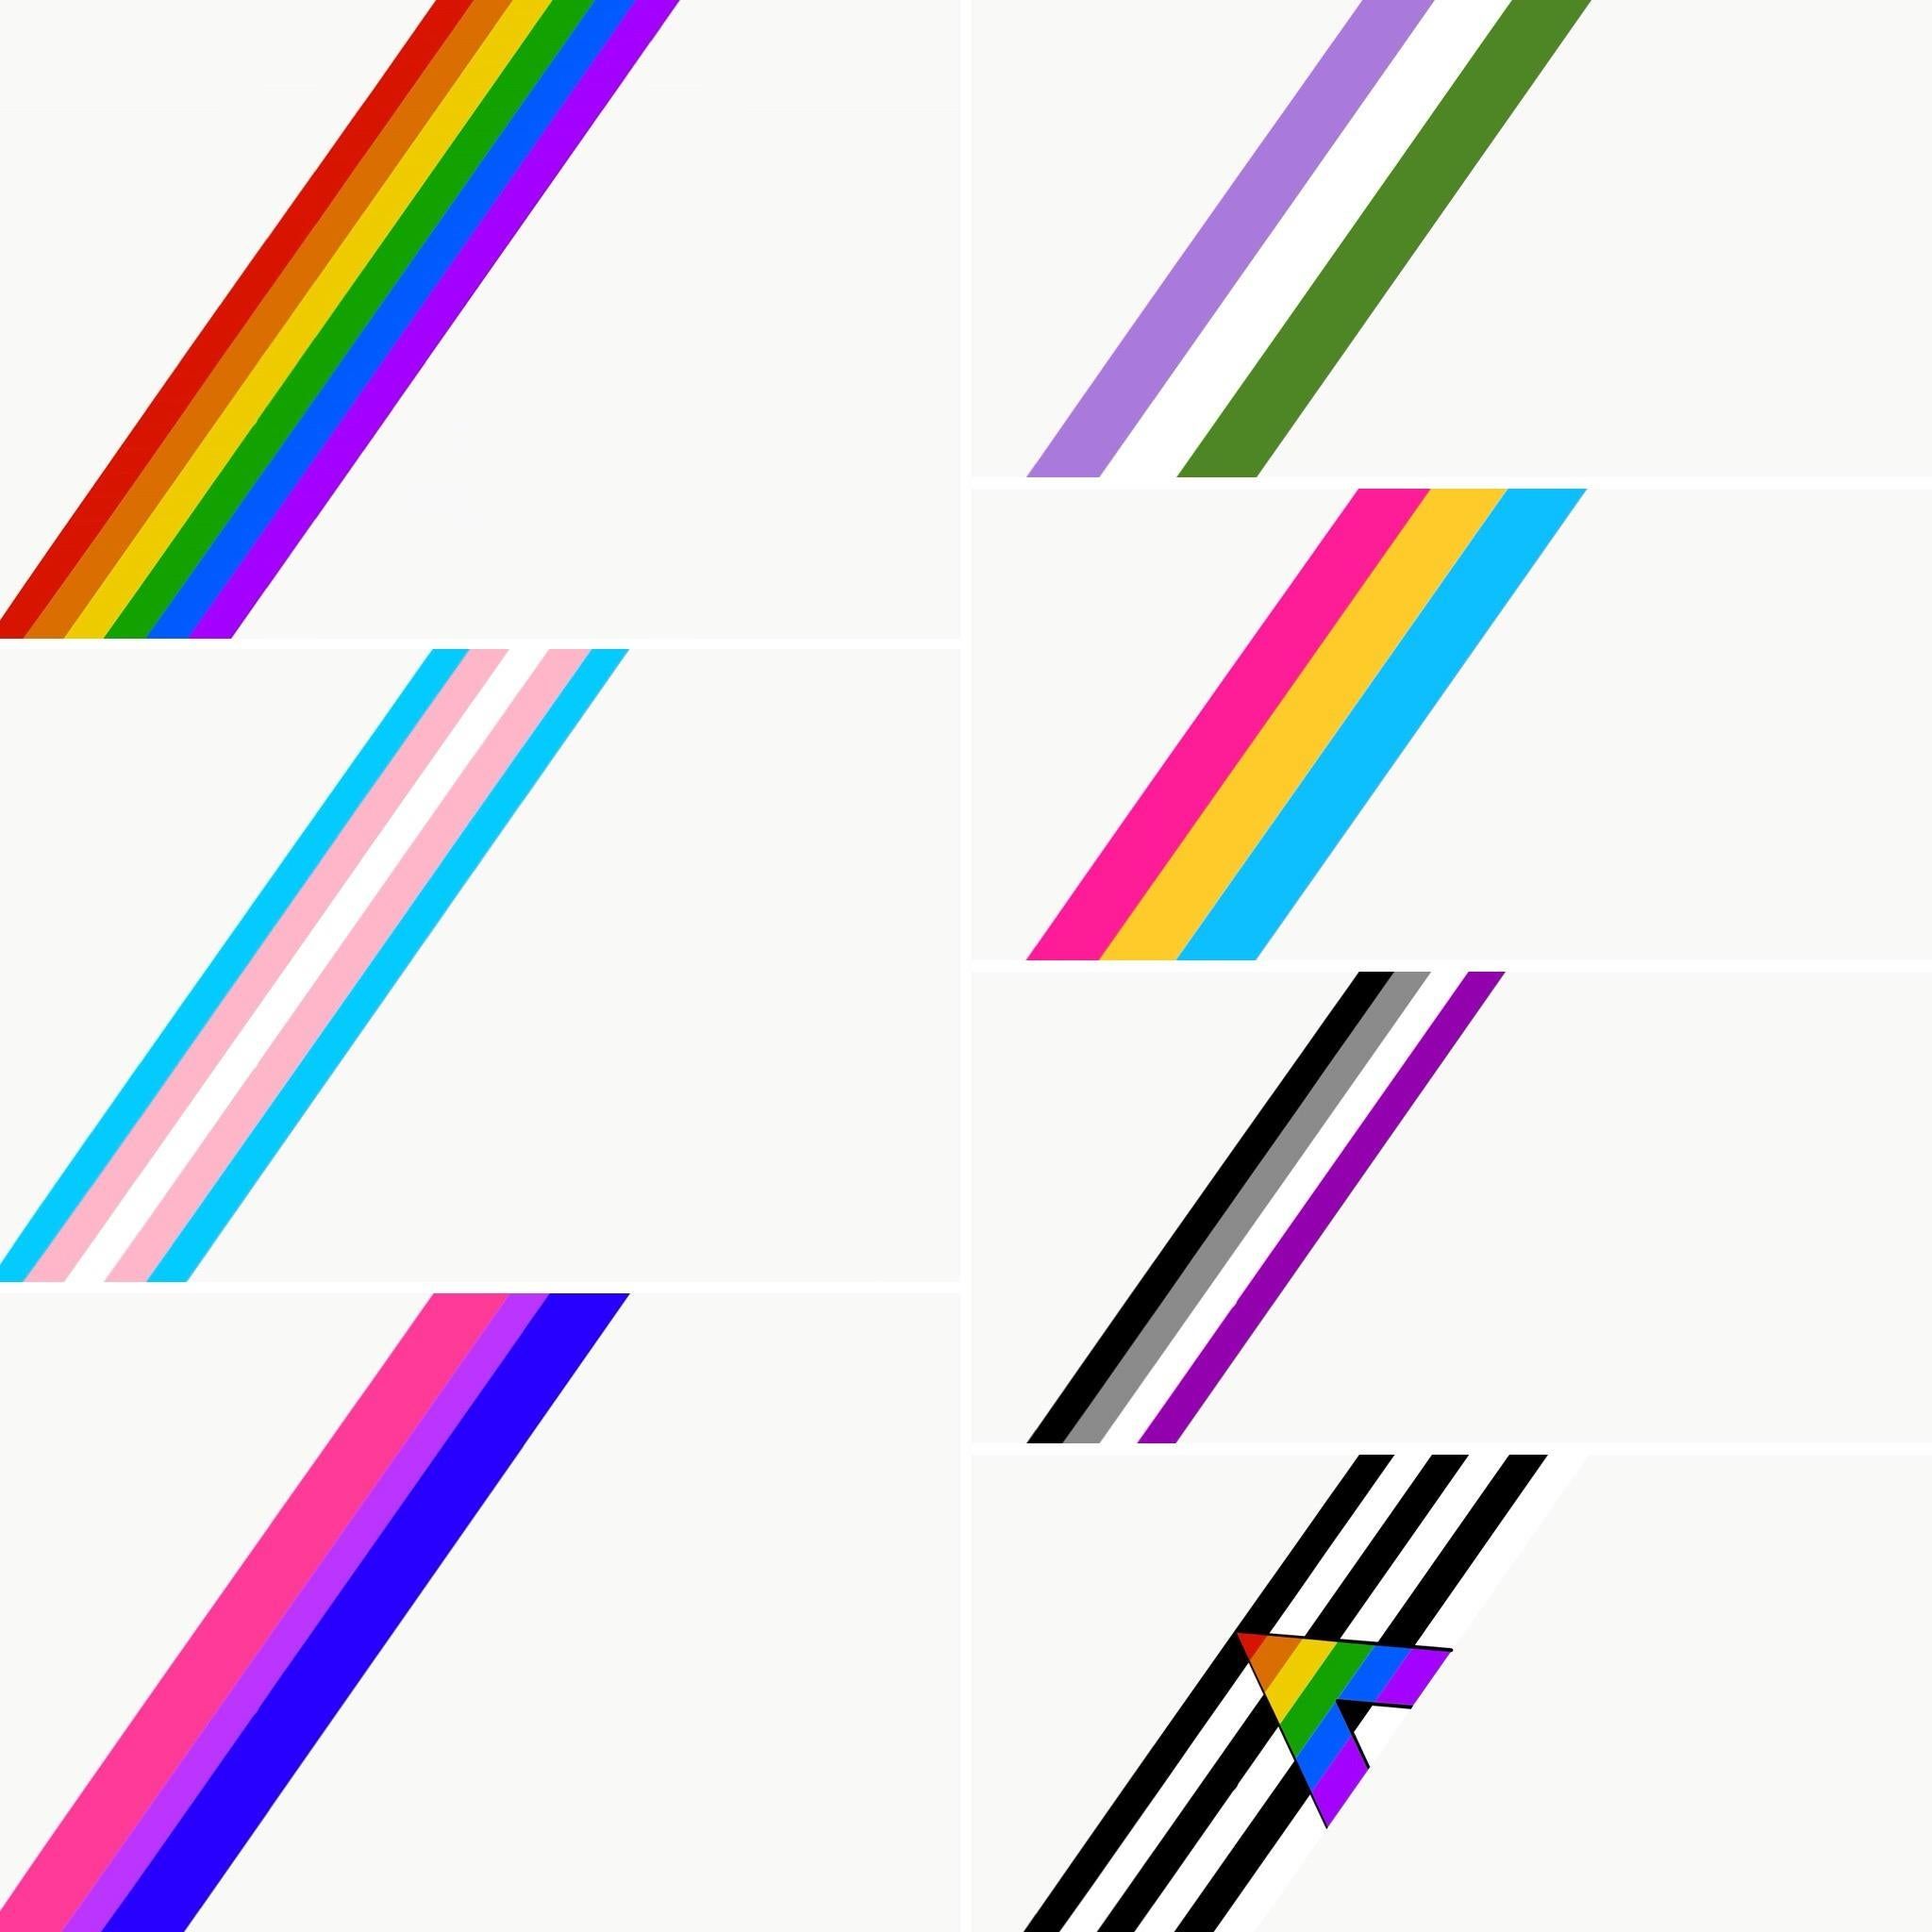 I made some minimalist wallpaper for Pride Month. Don't see one you like, DM me and I'll fashion you a custom one! Link to HiRes in comments